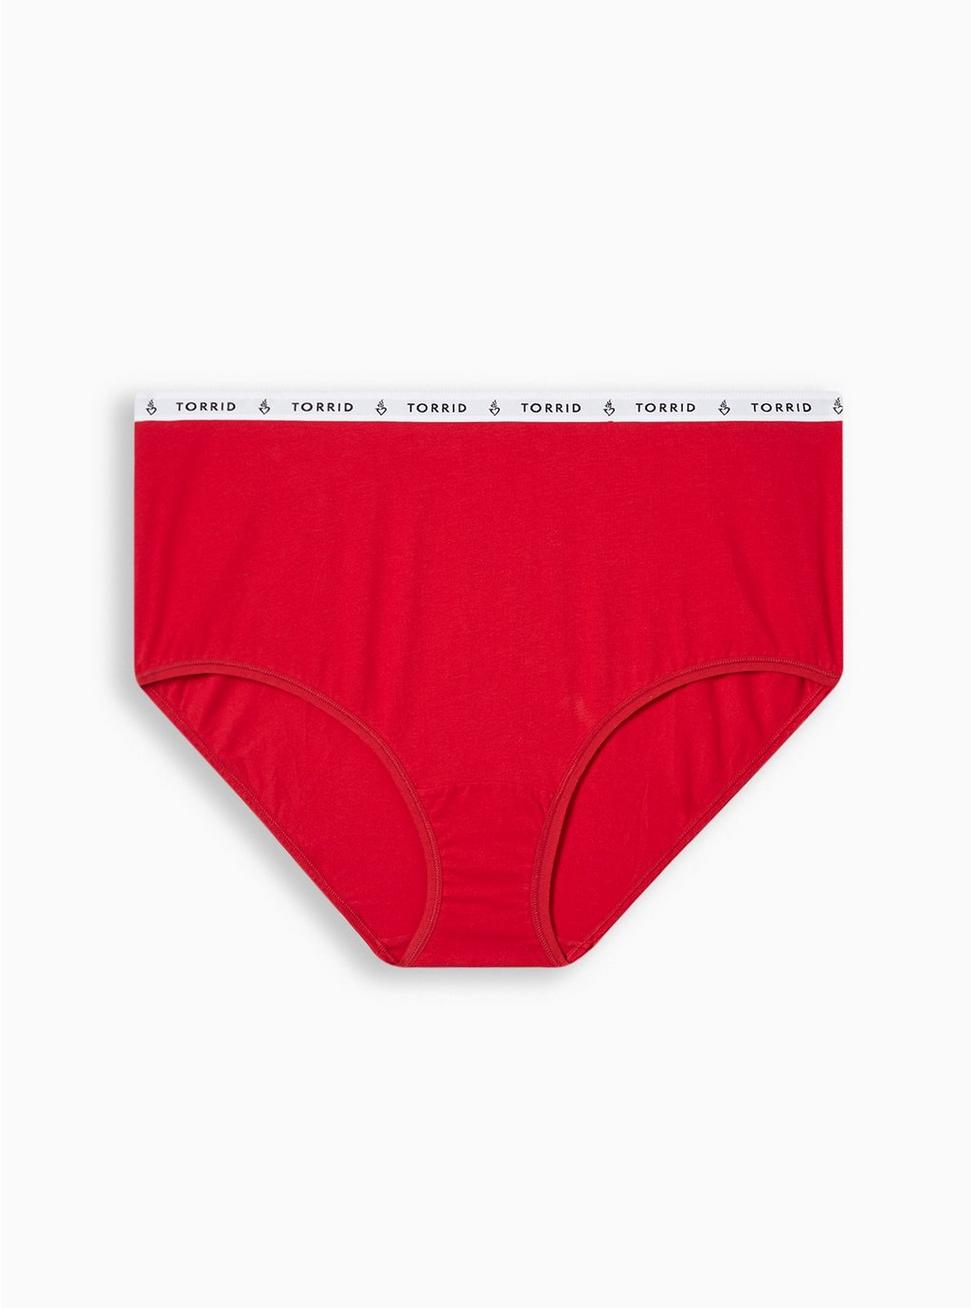 Cotton High Rise Cheeky Logo Panty, JESTER RED, hi-res